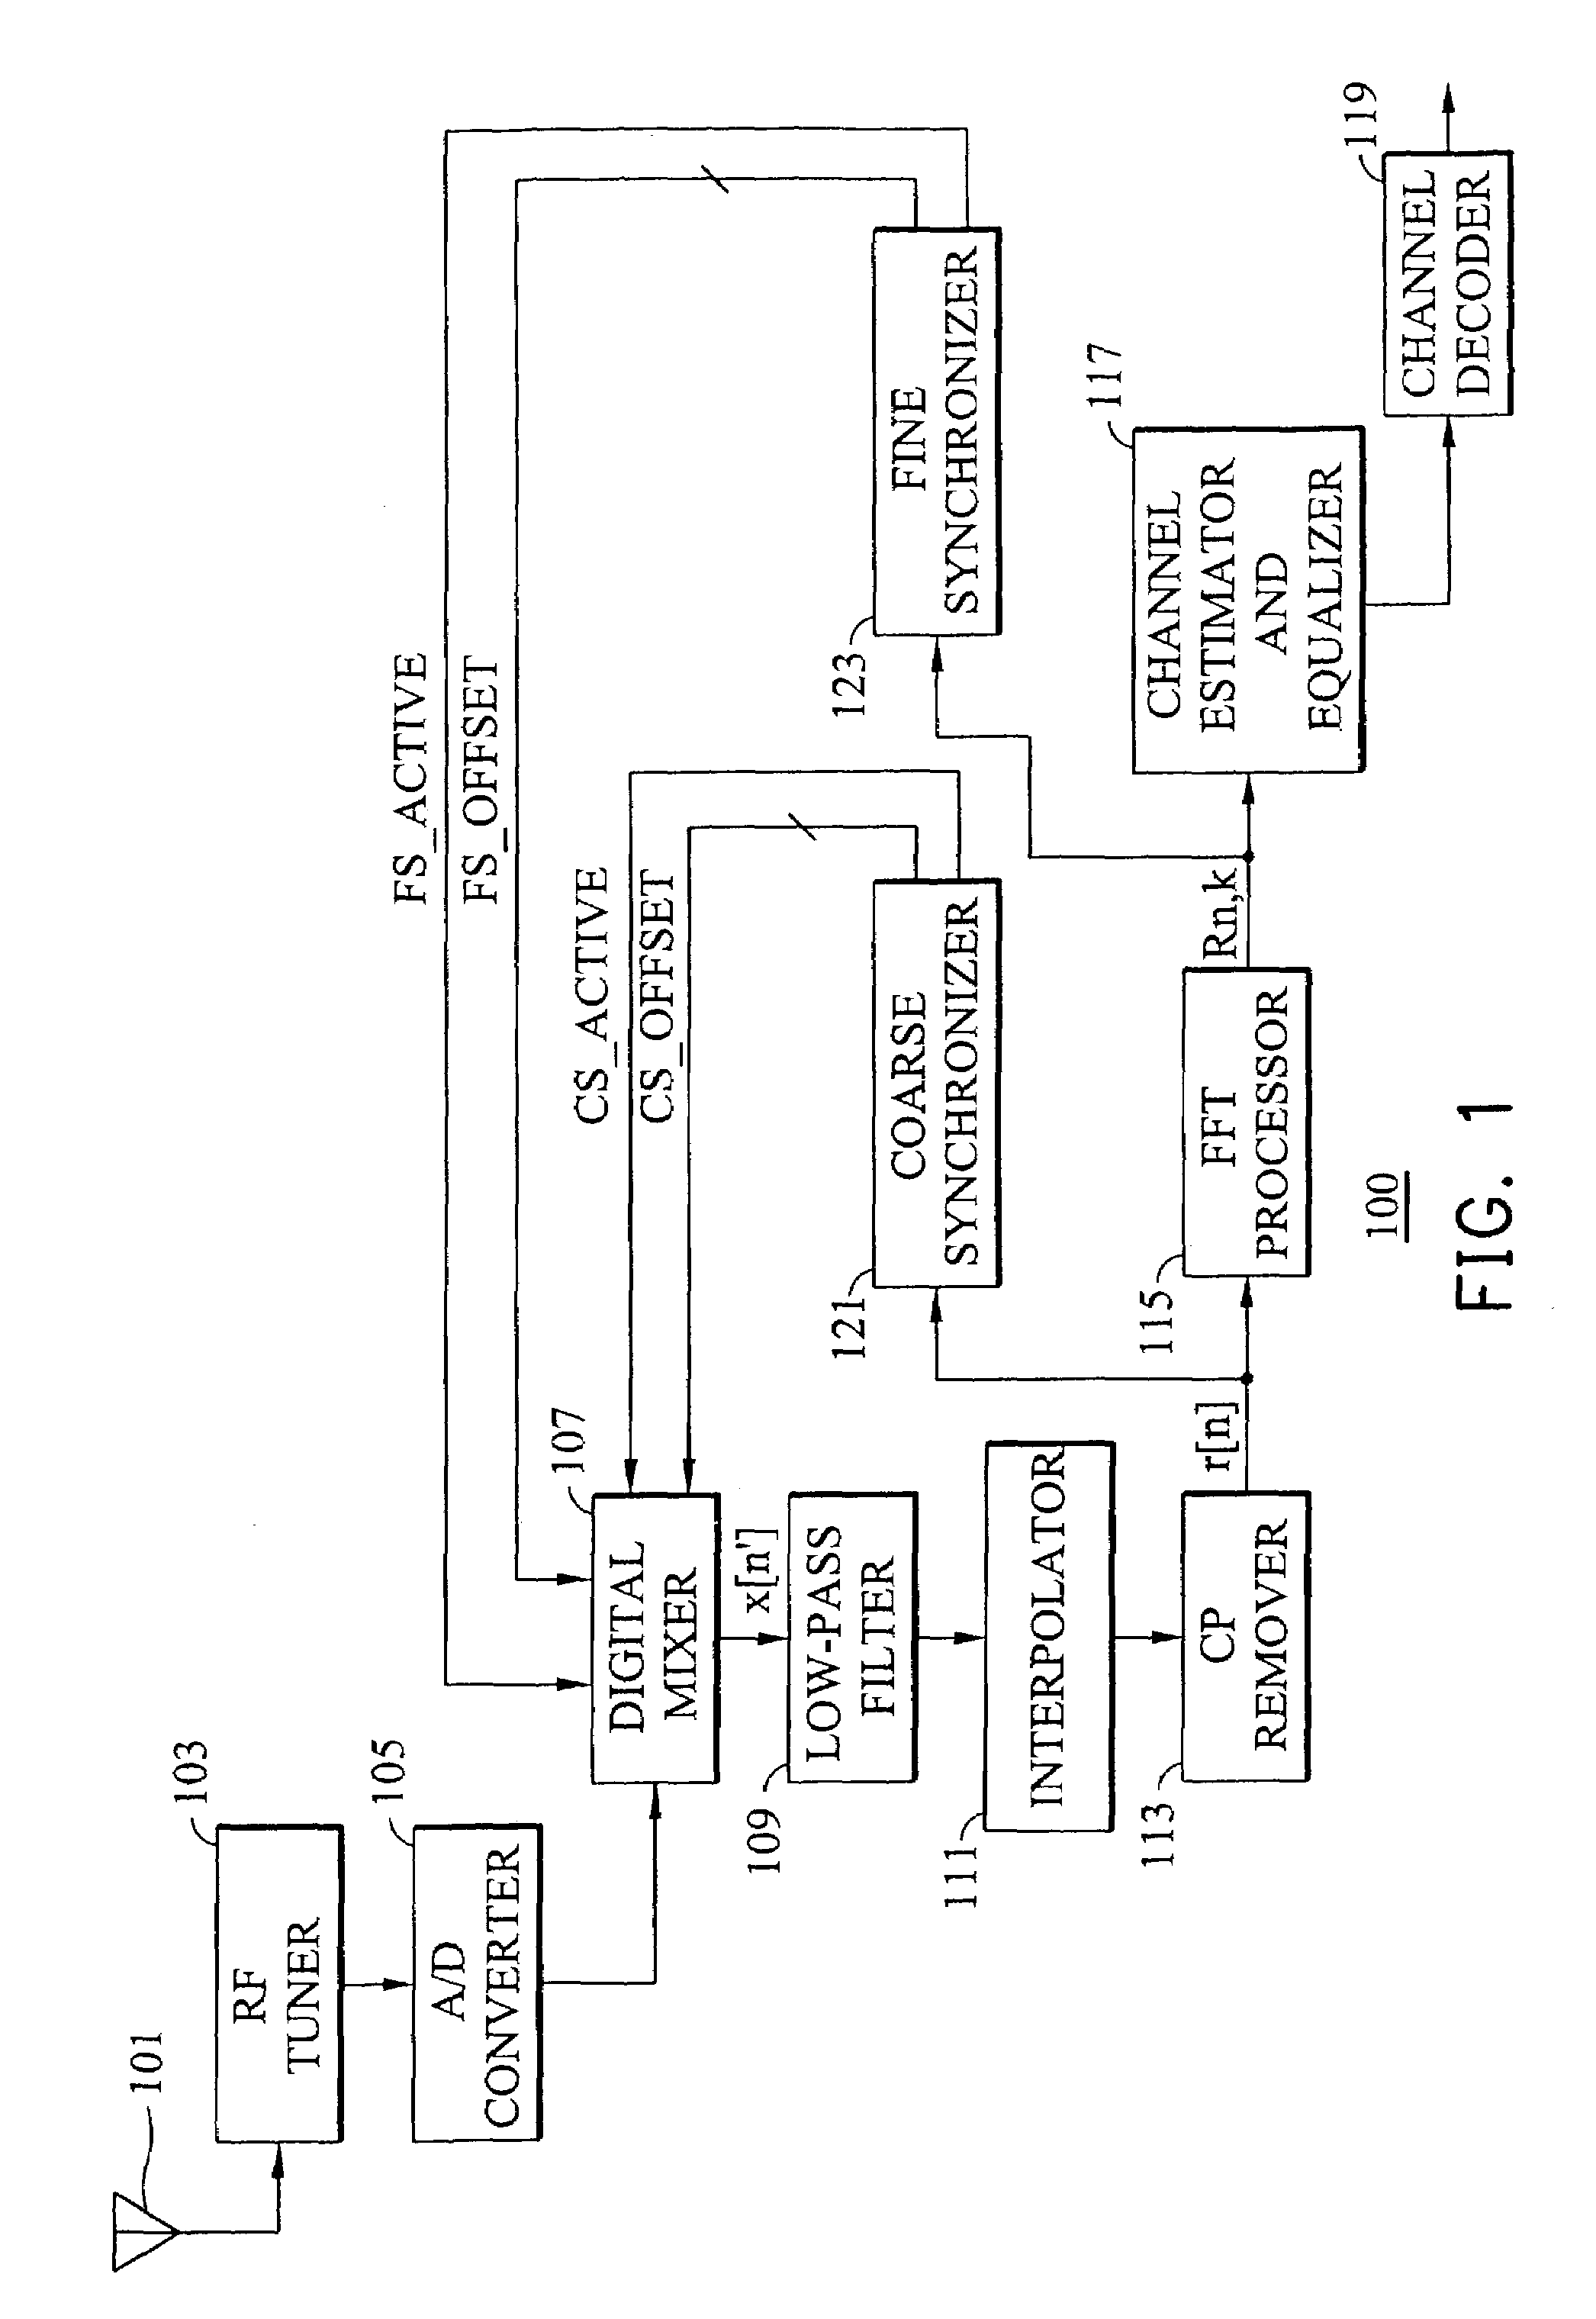 Frequency synchronization apparatus and method for OFDM systems